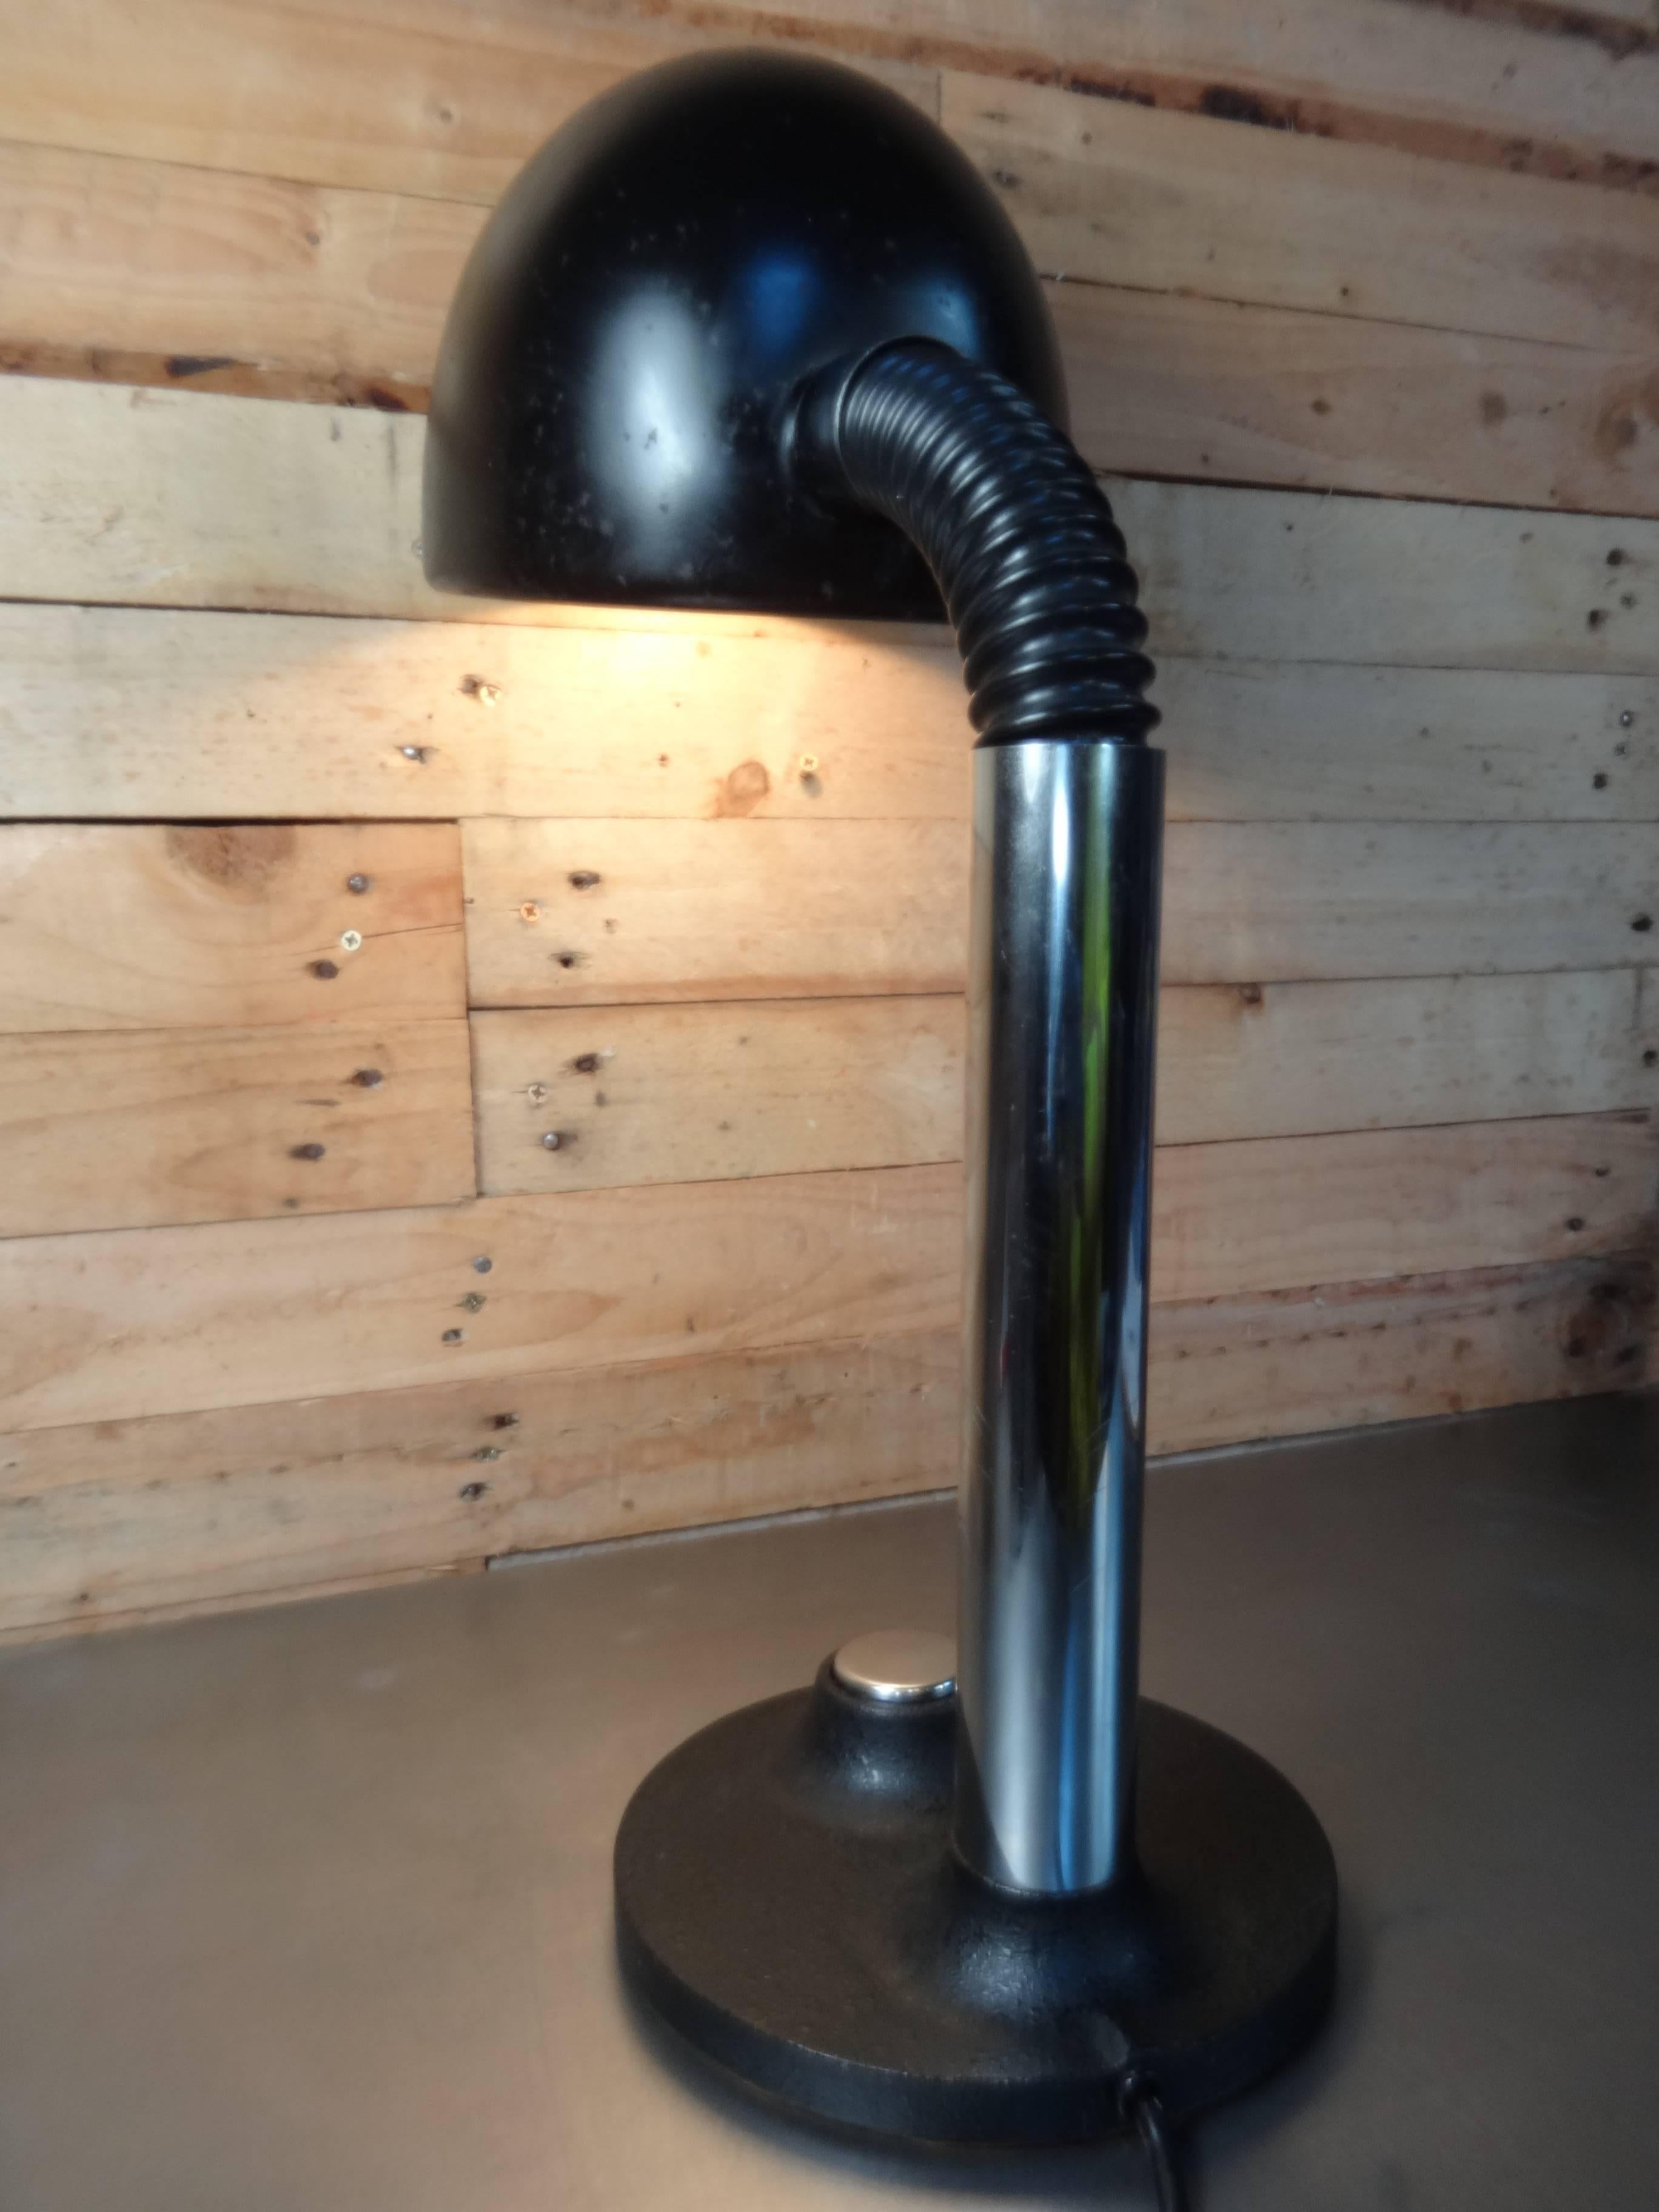 1970 Retro Vintage Black Metal and Chrome Industrial Table or Desk Light In Fair Condition For Sale In Markington, GB